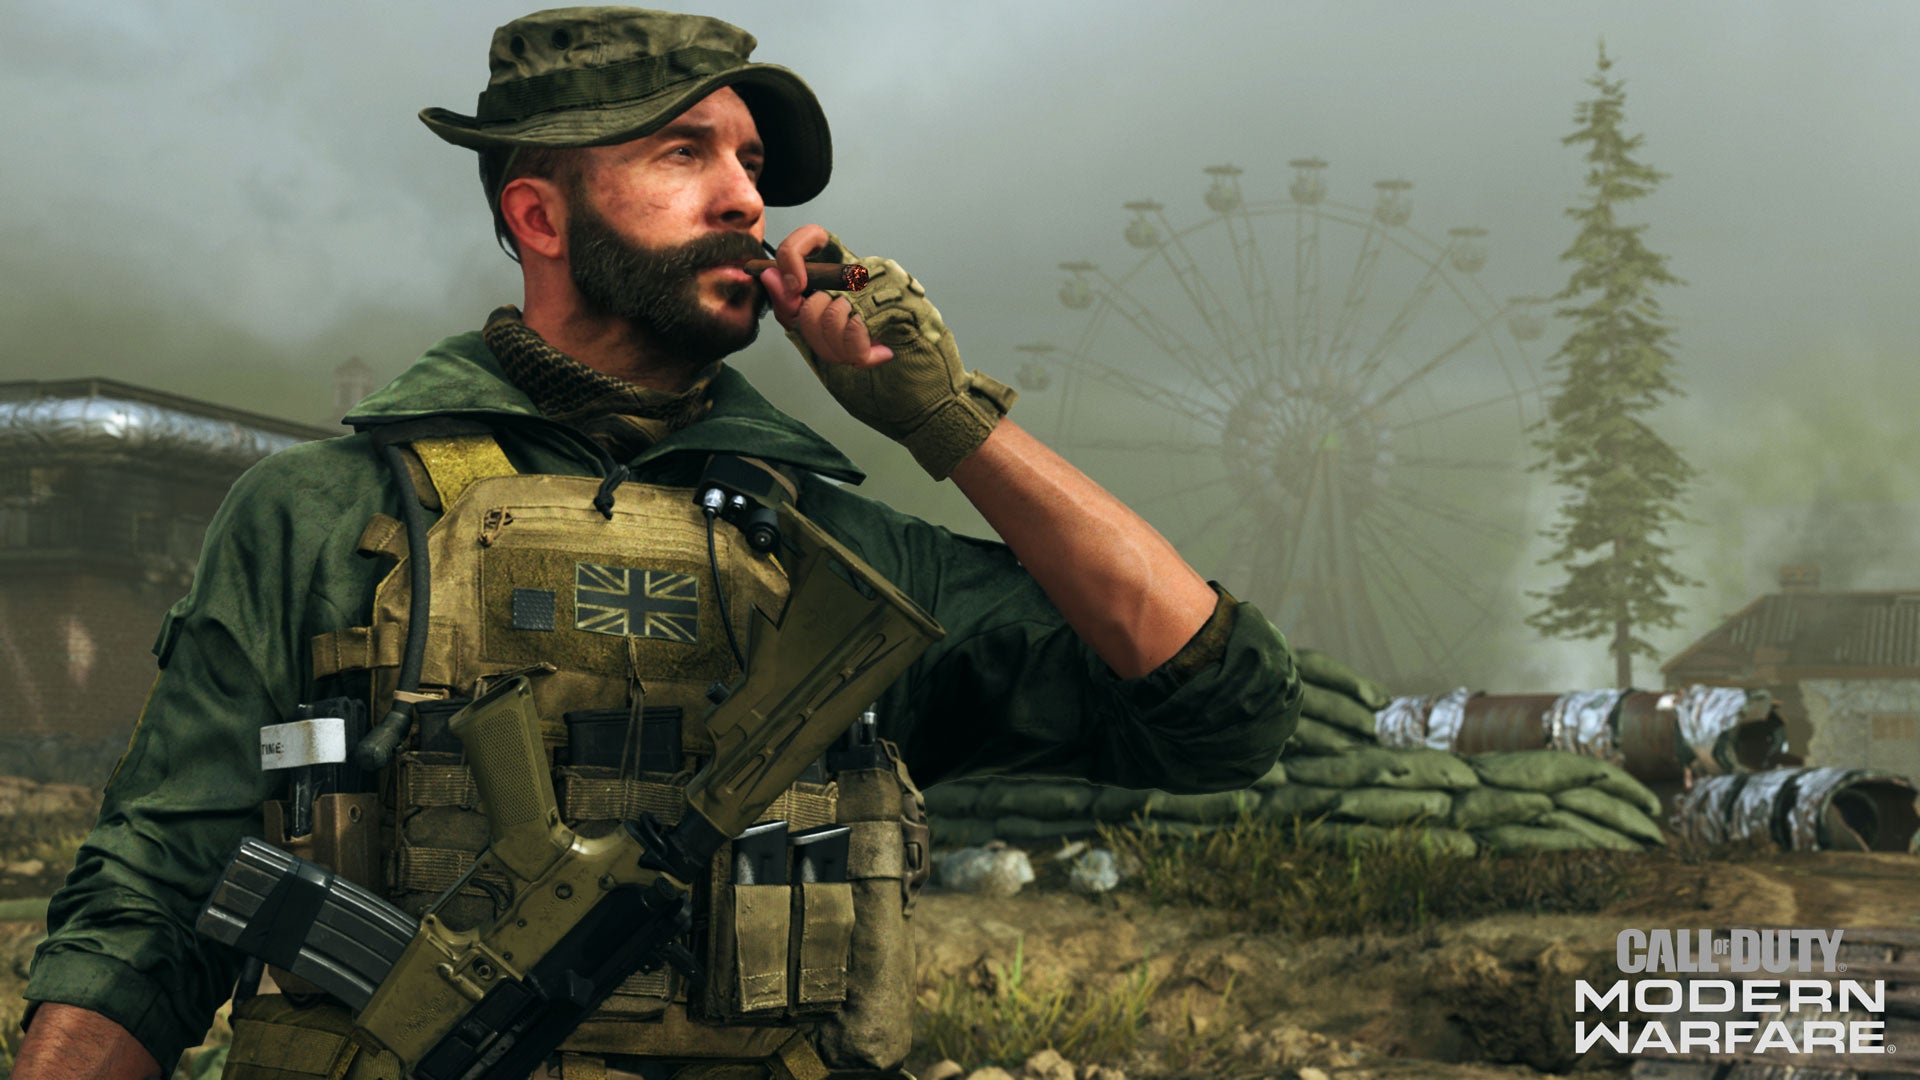 Image for Call of Duty: Modern Warfare and FIFA 20 were the UK's best-selling games during lockdown